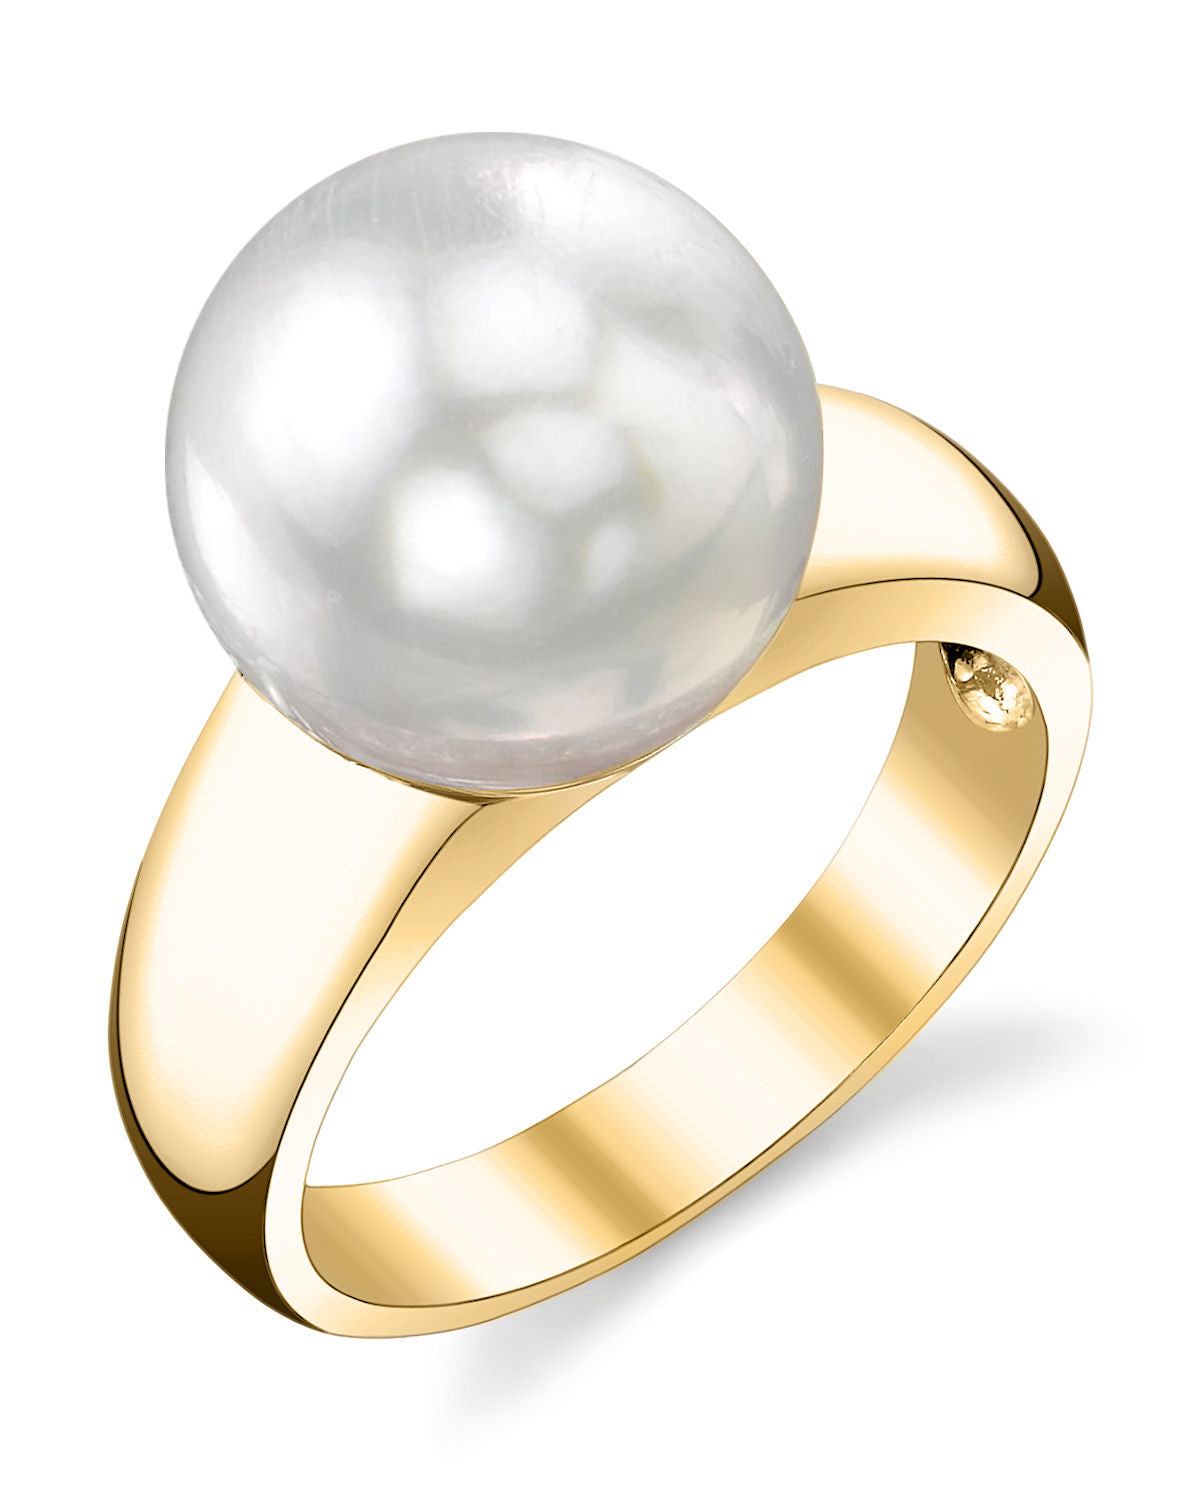 South Sea Pearl Abigail Ring - Secondary Image